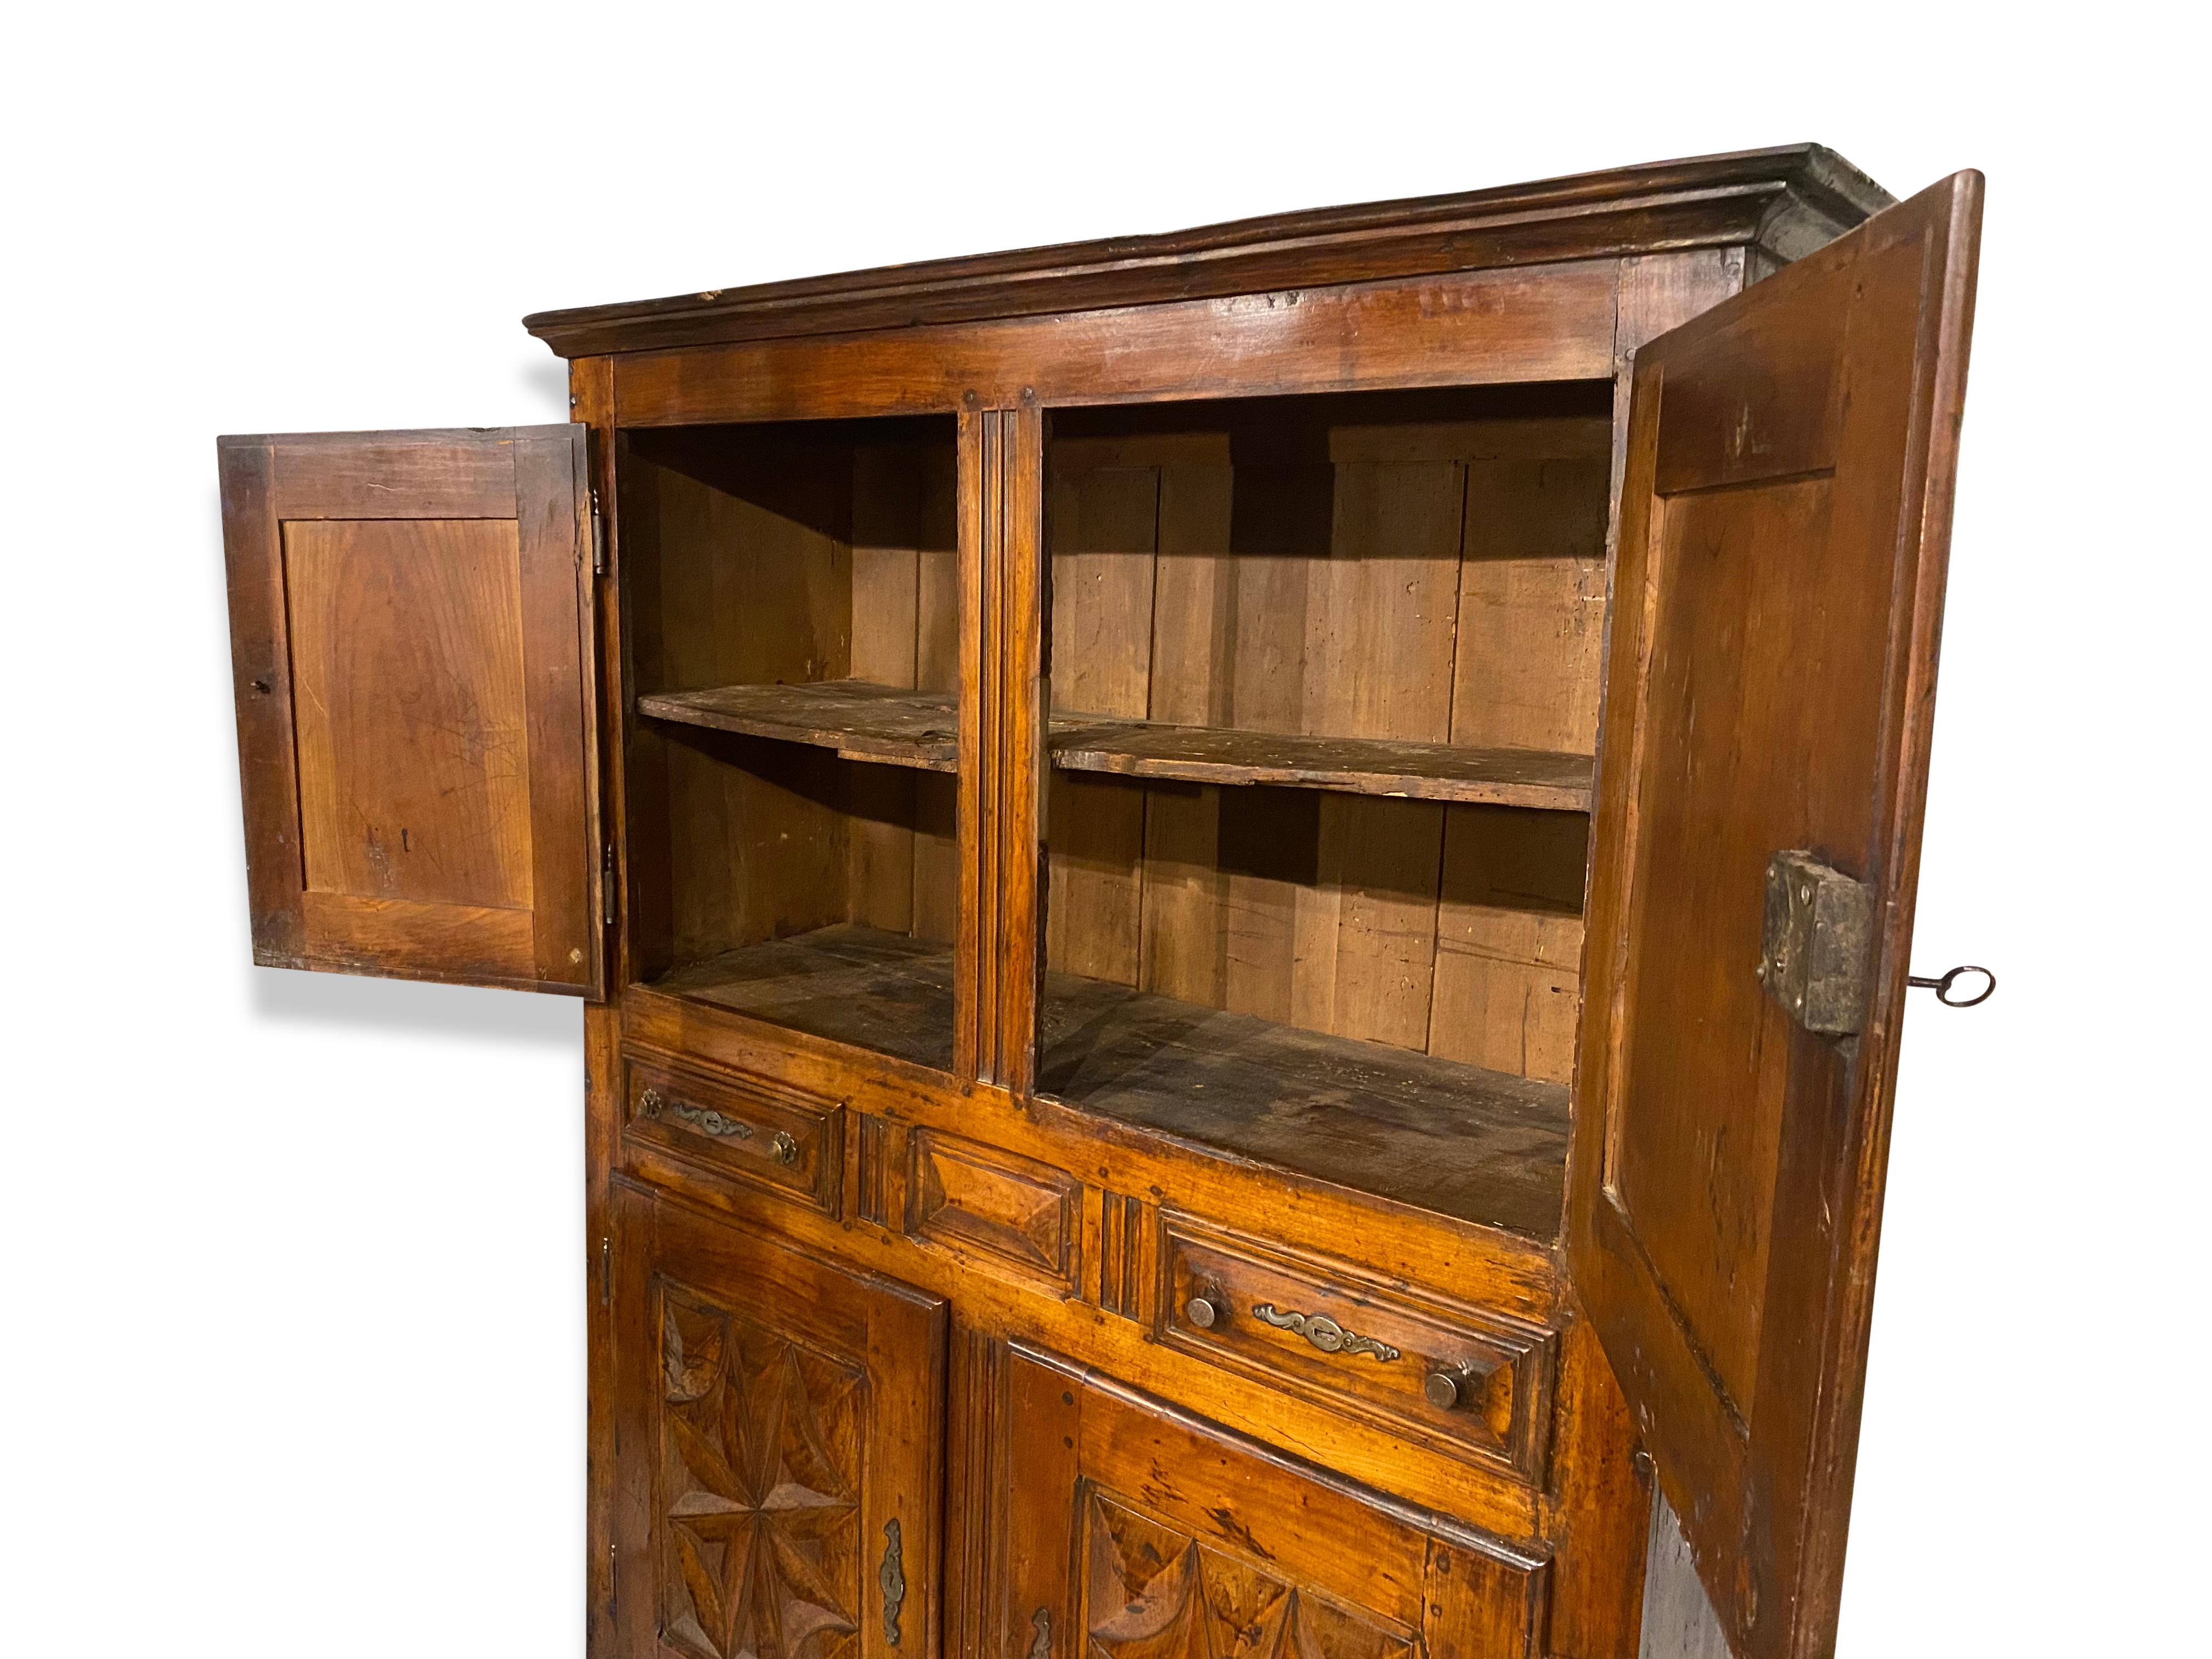 A Stunning French Walnut Provincial cupboard dating from the early 17th Century in the period of Louis XIII.Consists of four carved panelled doors with two drawers and the original ironmongery making this into a truly wonderful and usable early